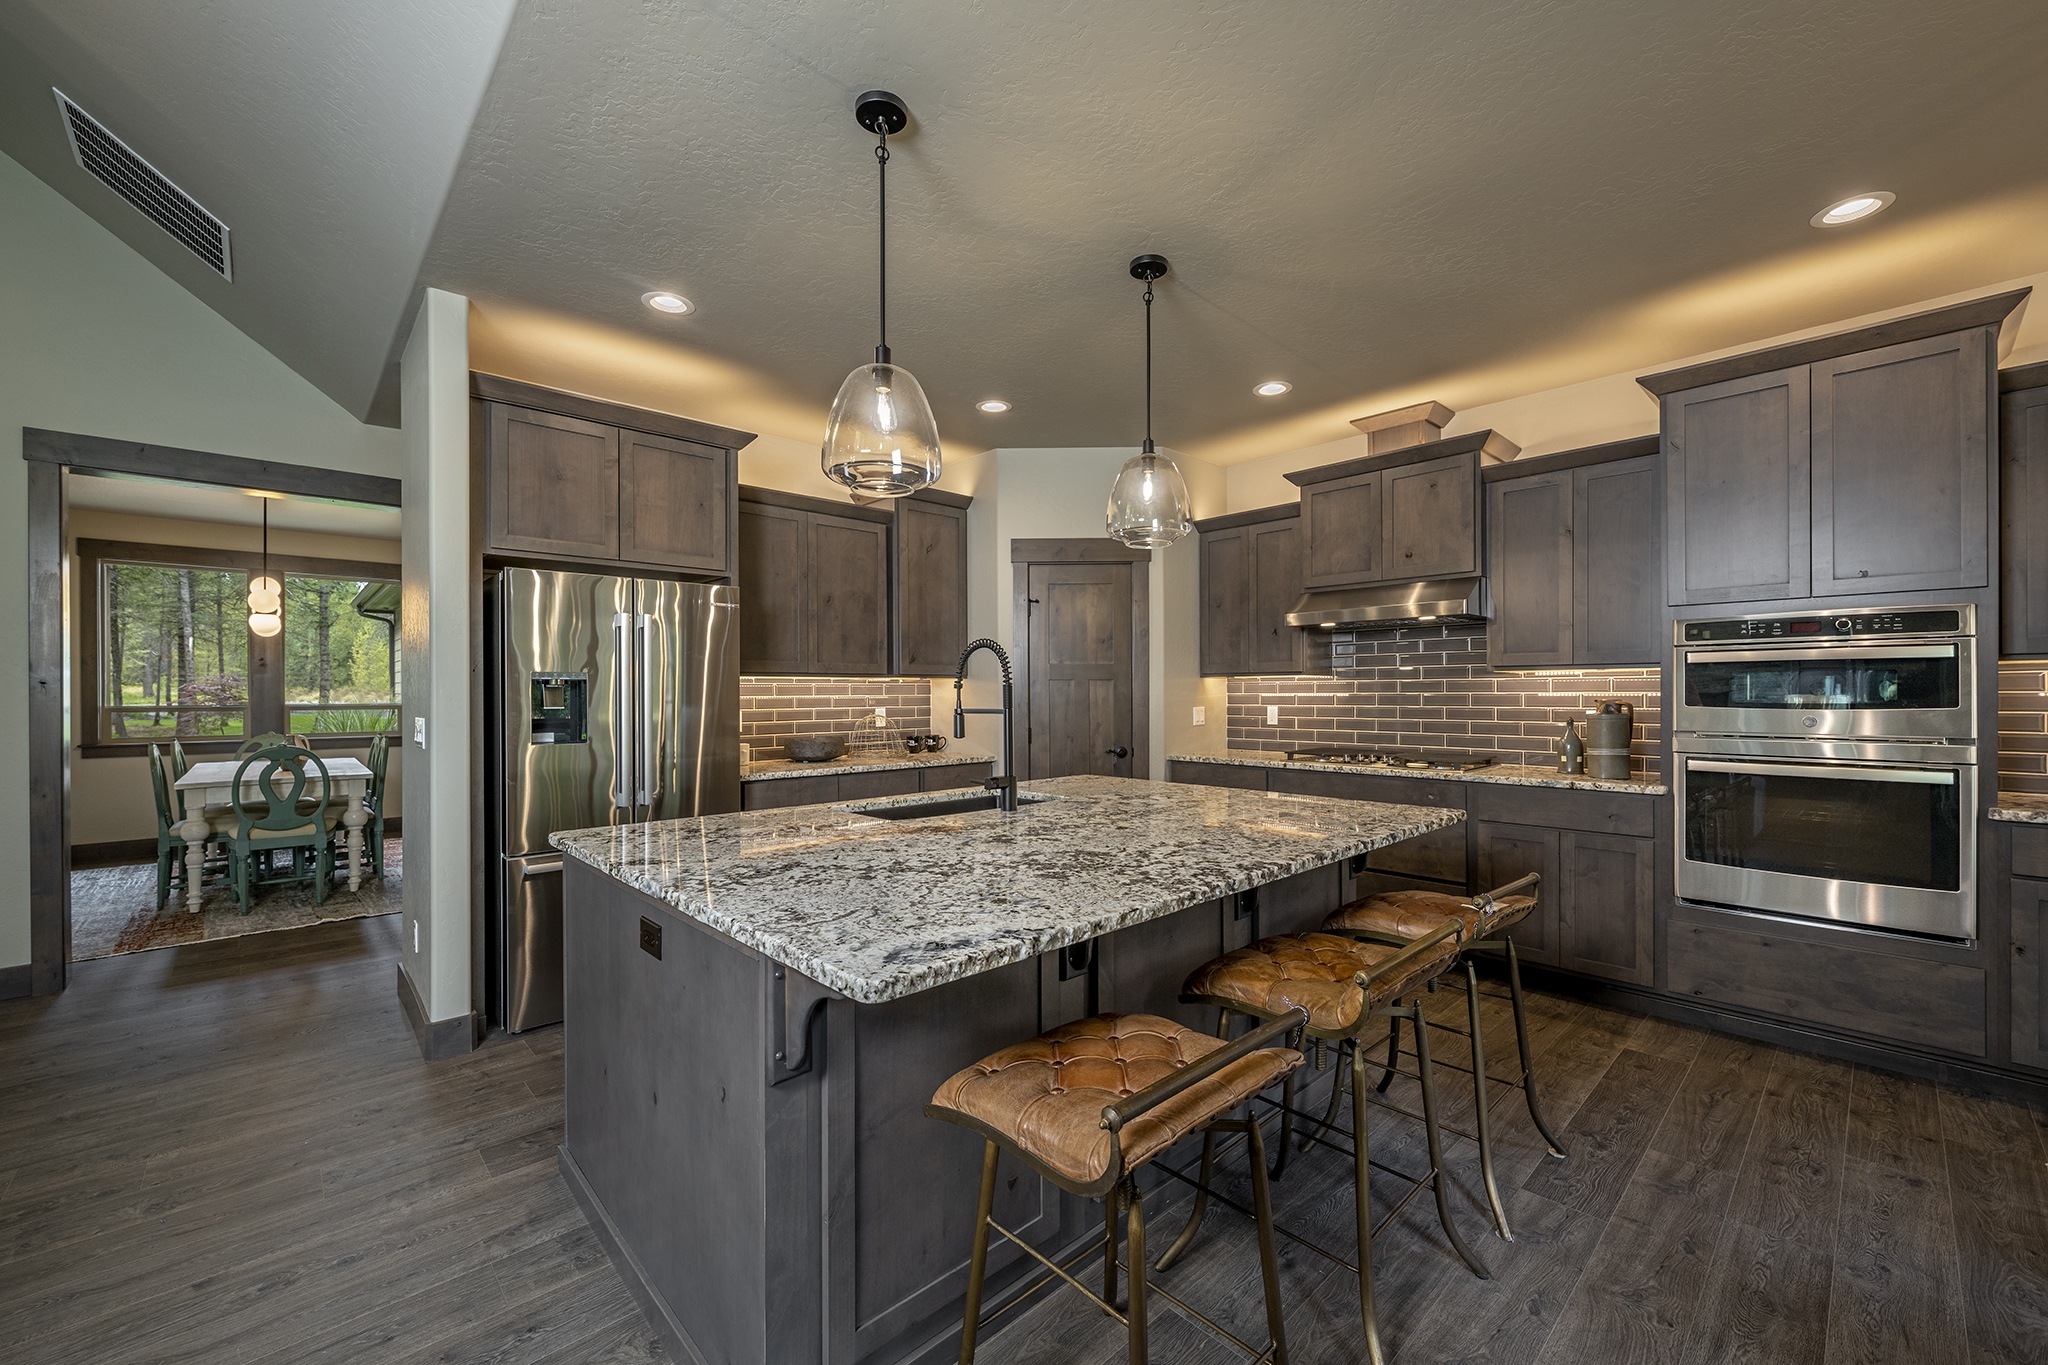 The kitchen includes dark trim surrounded by dark tile.  The black- and-white theme continues in the granite island